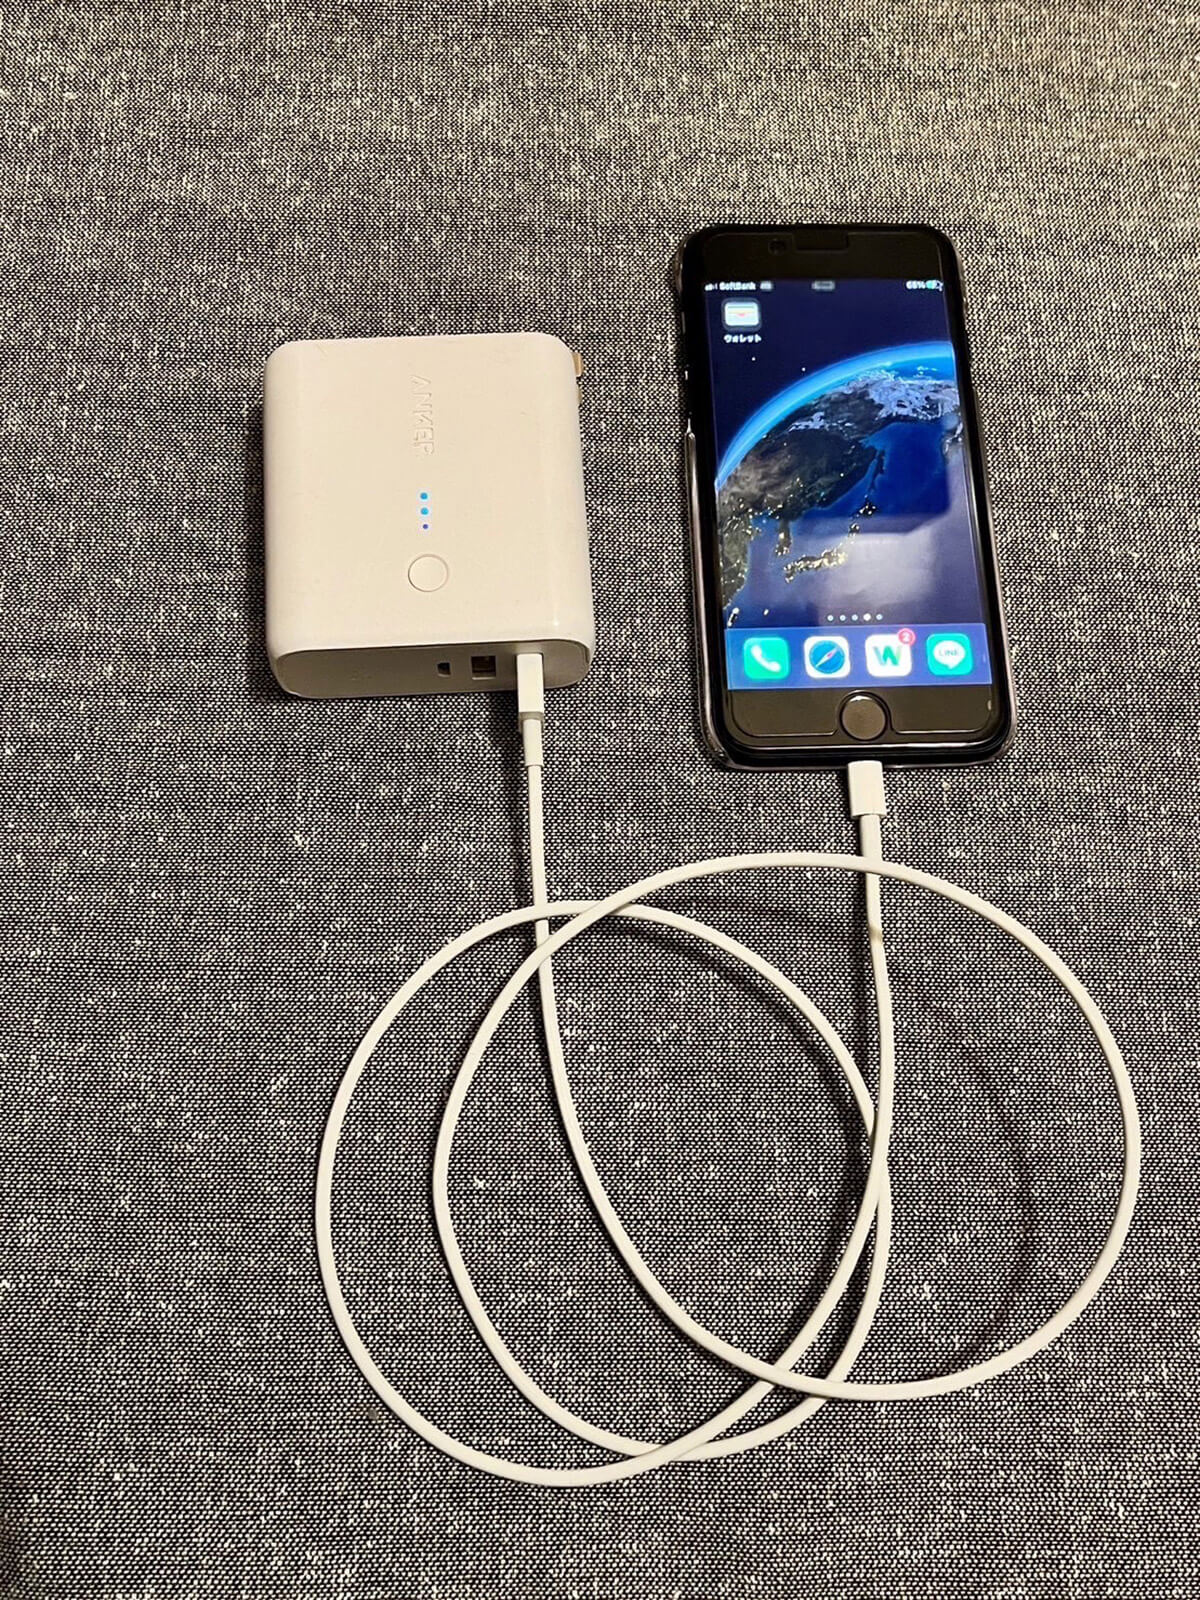 Ankerのモバイルバッテリーで充電